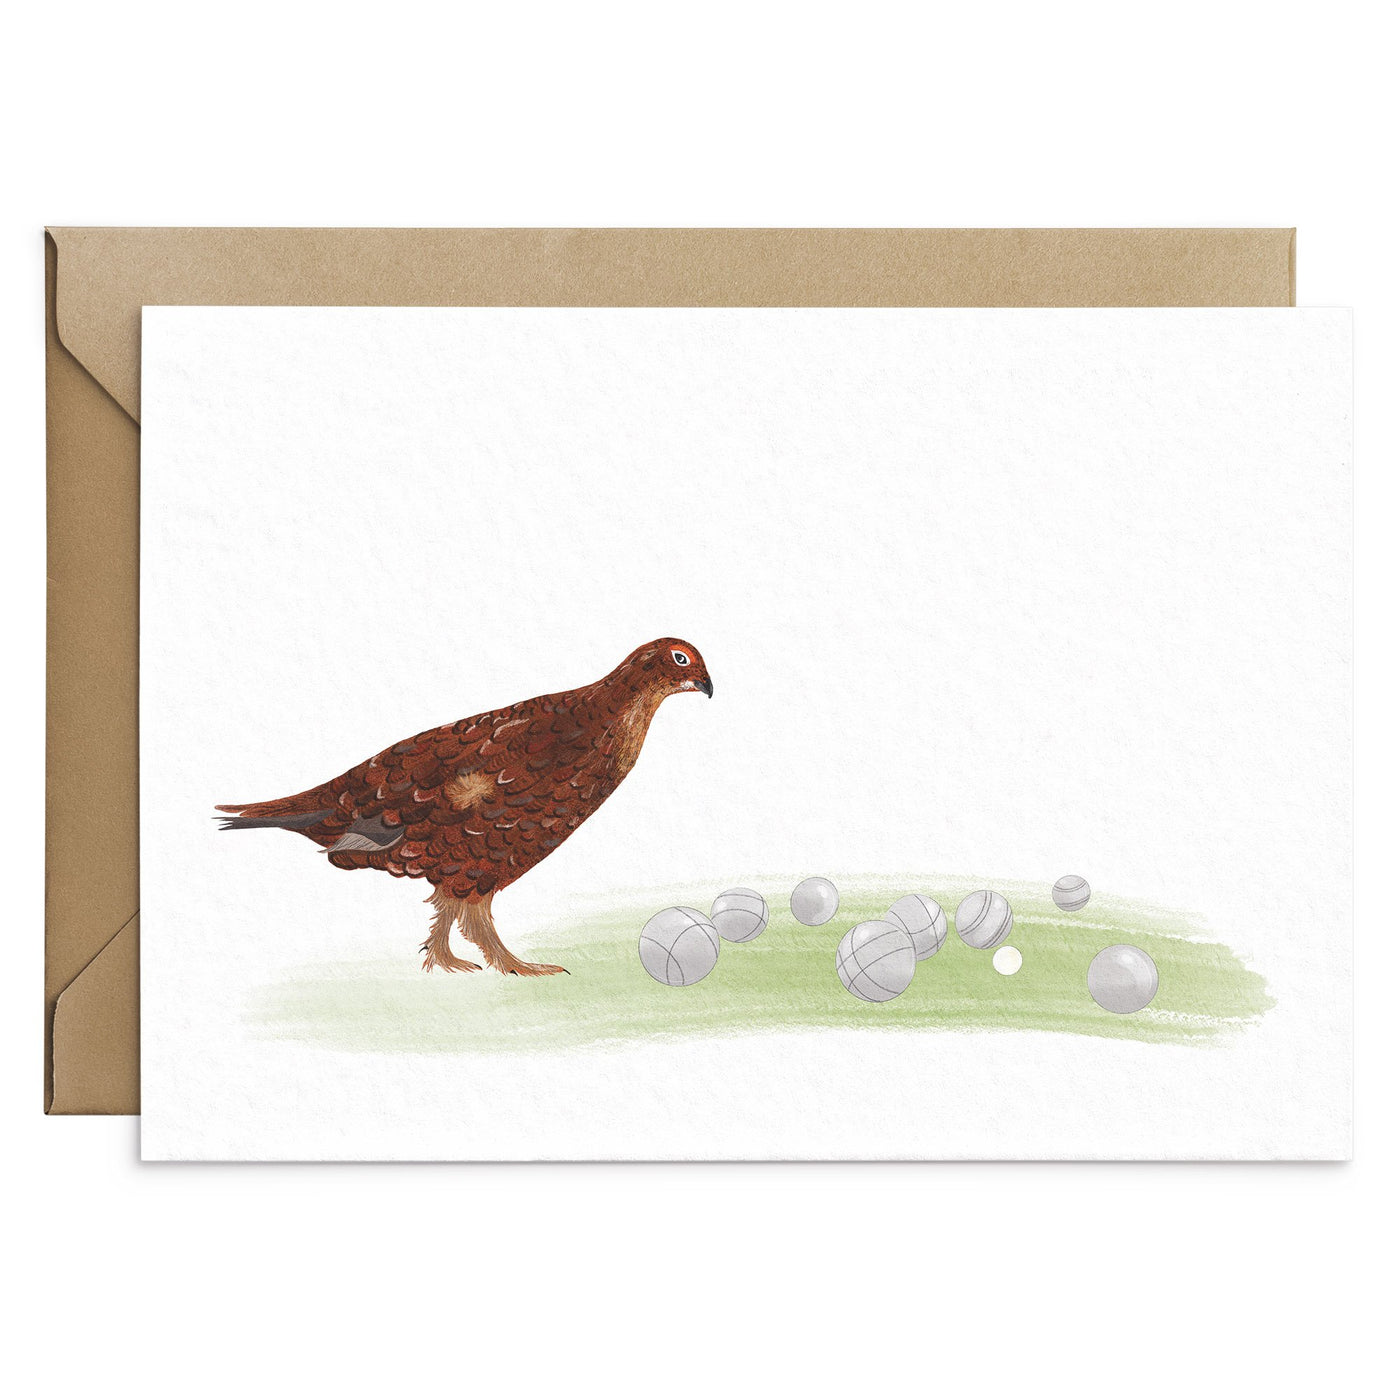 Grouse Playing Boules Game Birds Card - Poppins & Co.